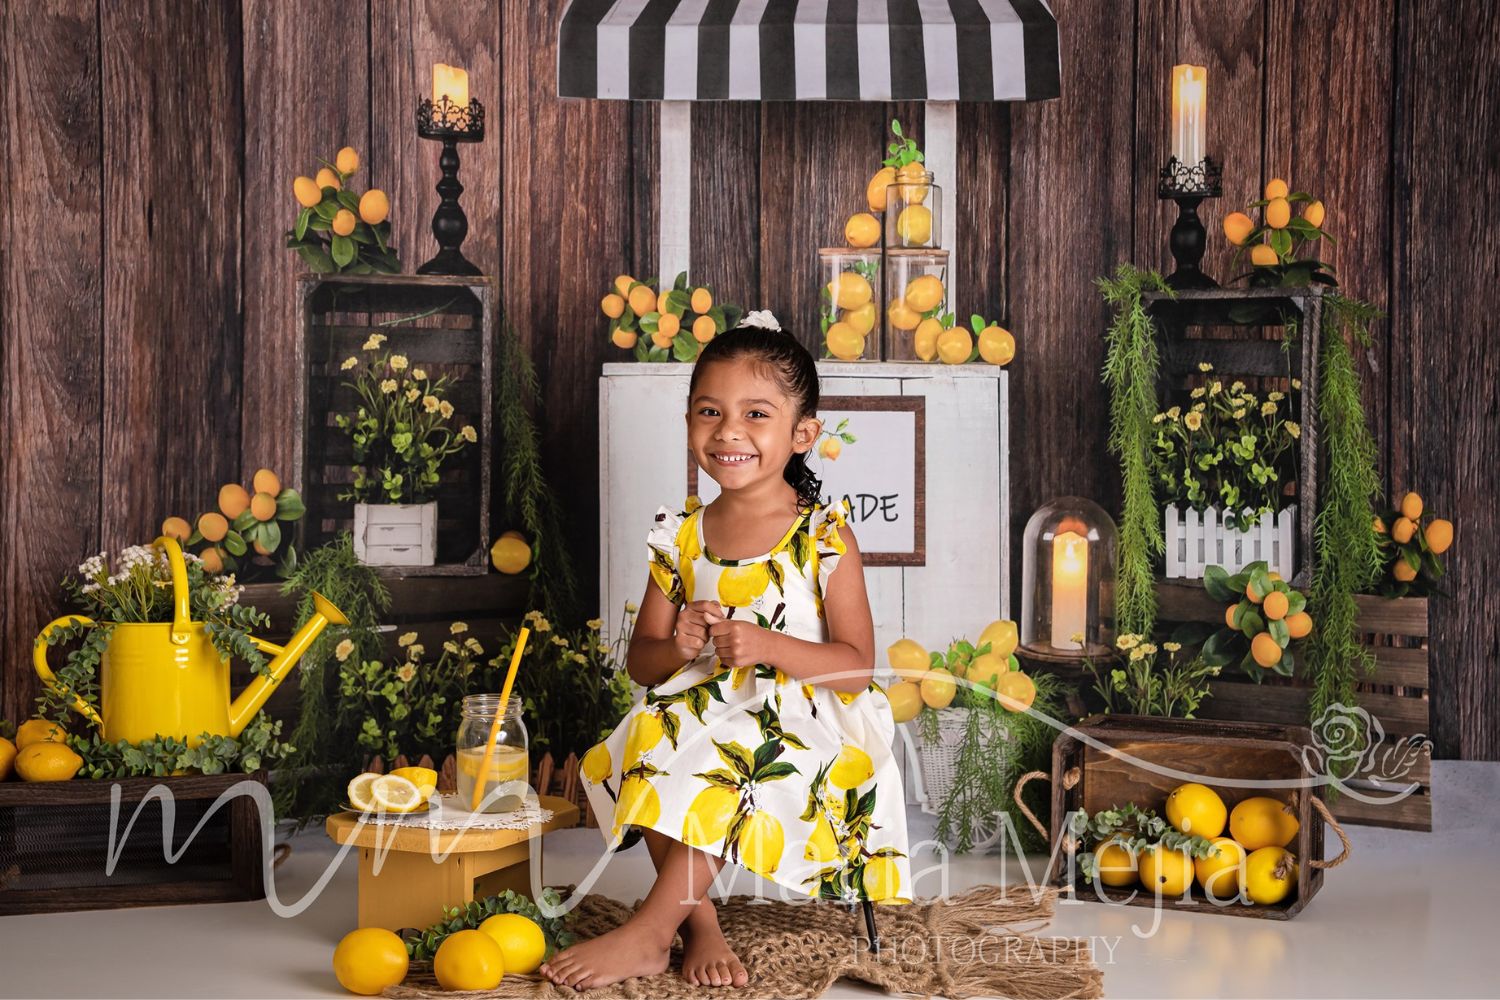 a little girl taking photo with lemon decorations